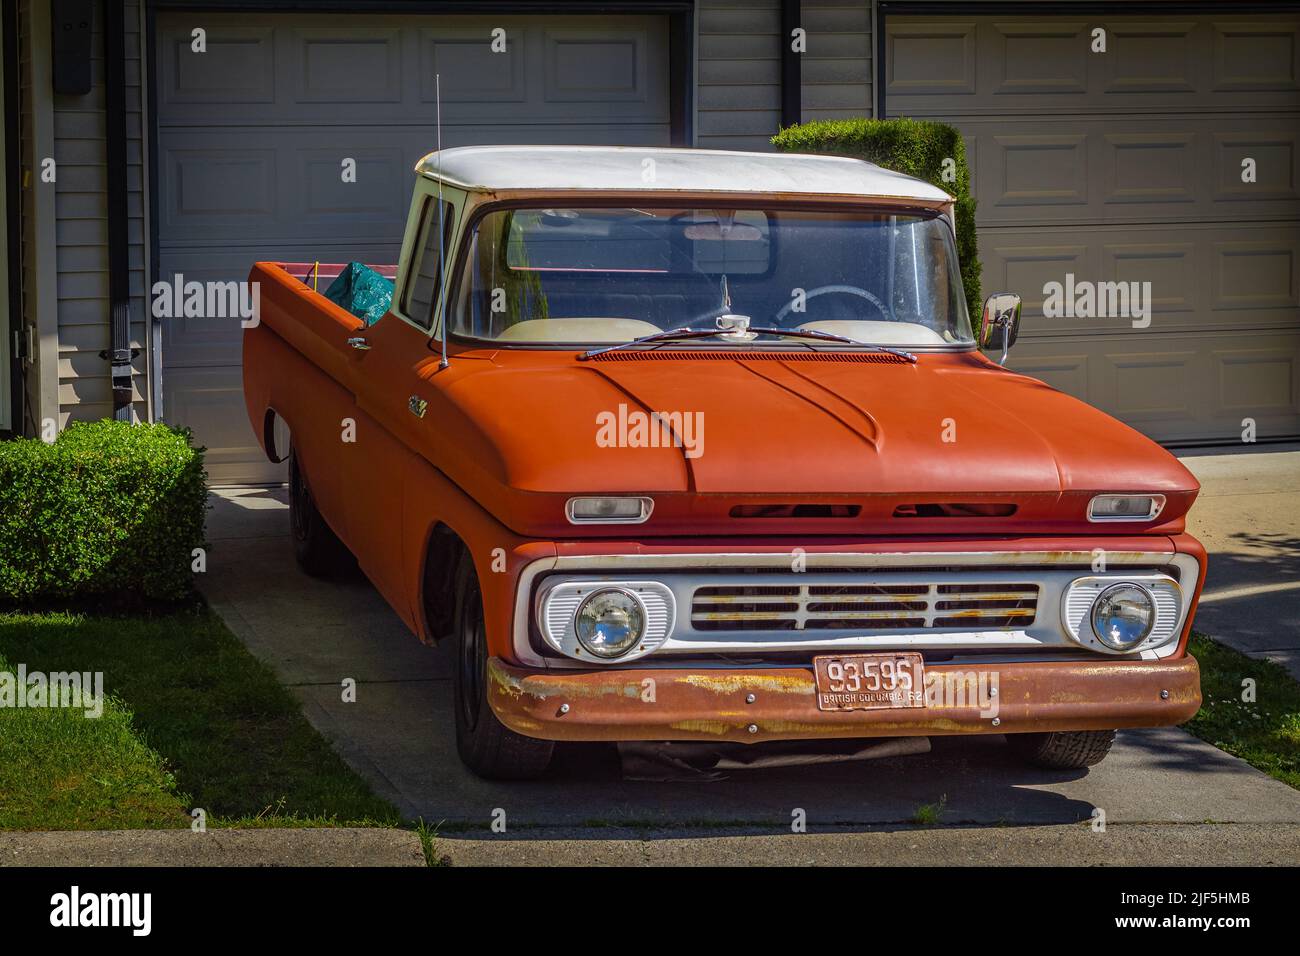 Retro pickup truck on a sunny summer day. Orange Chevrolet C10 Pick Up Truck. Vintage Chevy truck parked on a street-Vancouver BC Canada-June 24,2022. Stock Photo